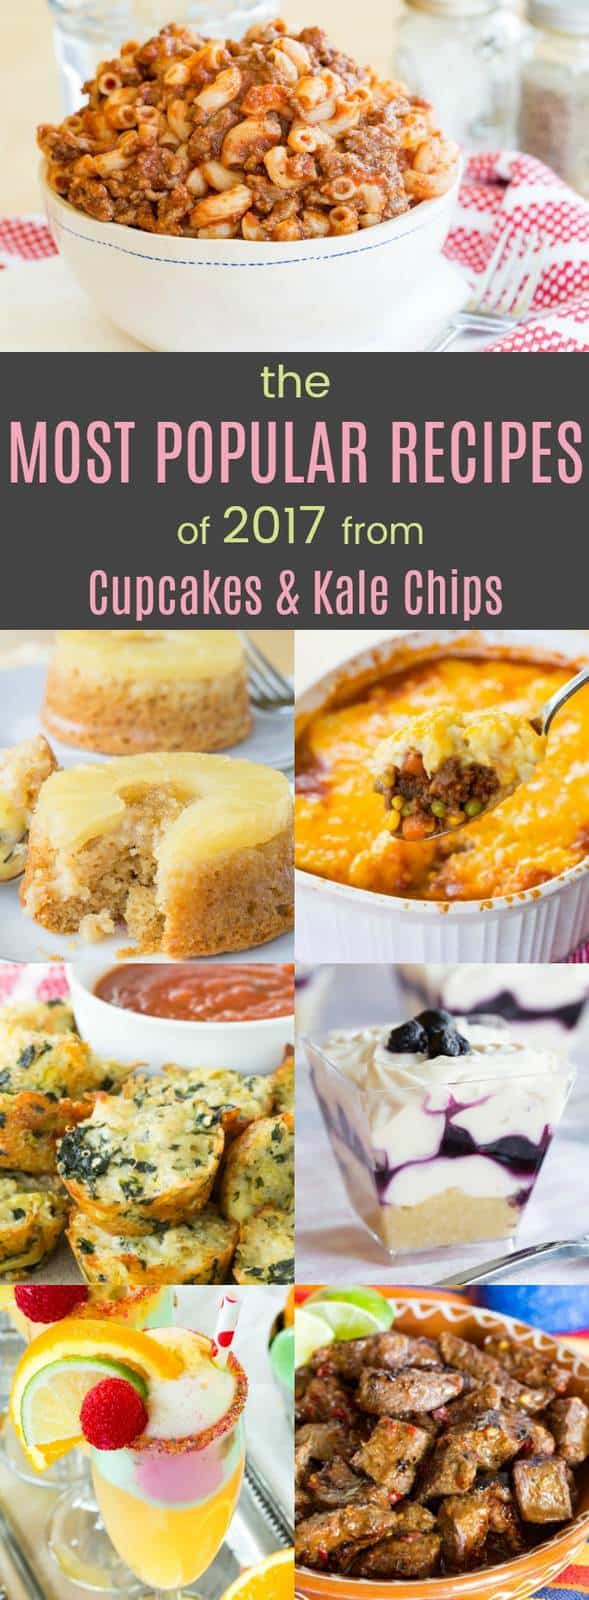 The Most Popular Recipes of 2017 from cupcakesandkalechips.com